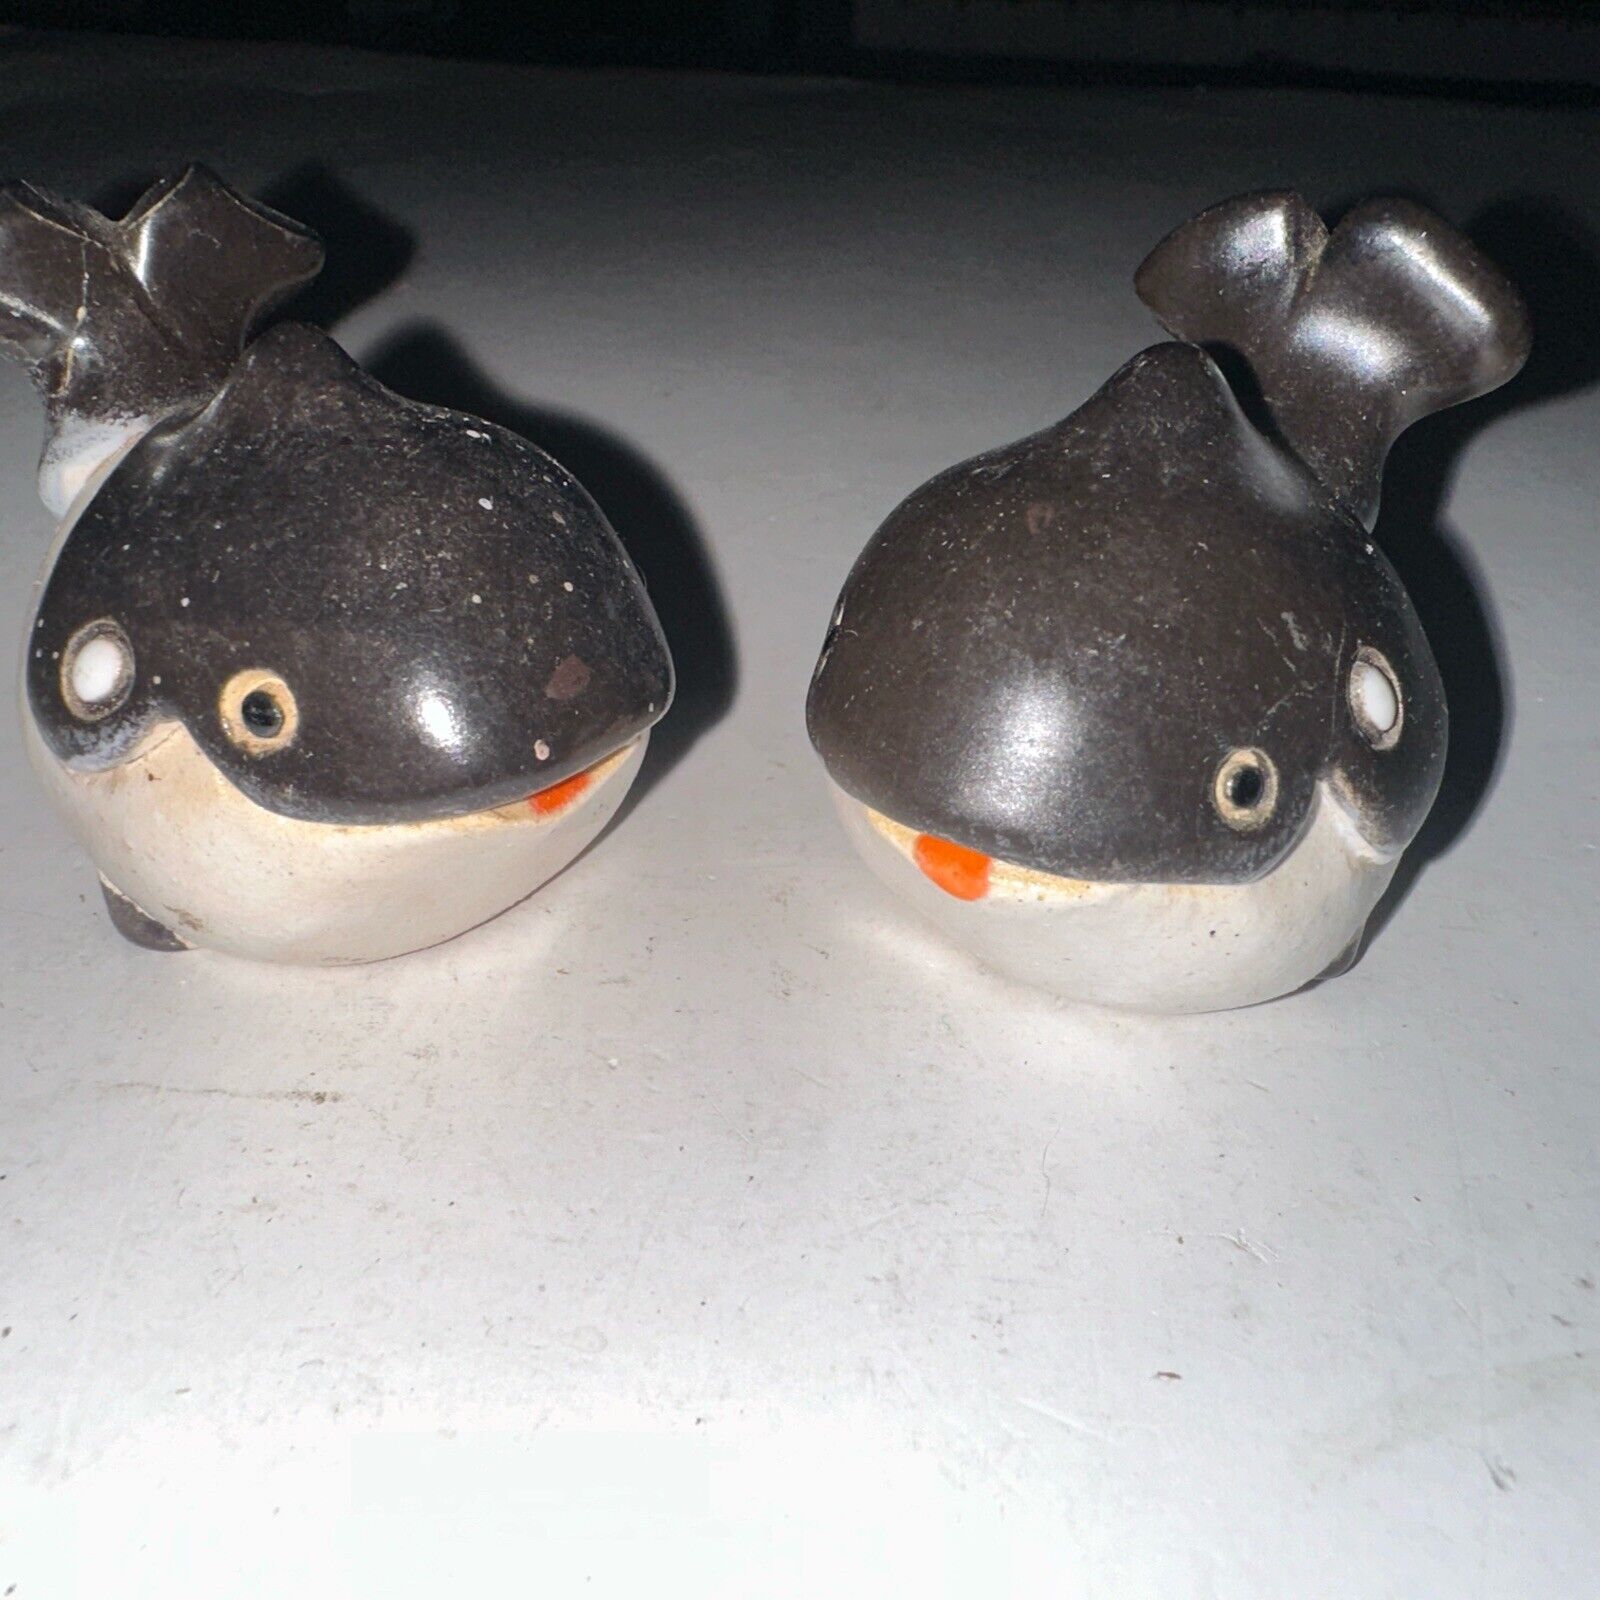 2 ARTESANIA RINCONADA CLAY POTTERY HAND CARVED BABY ORCA WHALE RETIRED SIGNED...